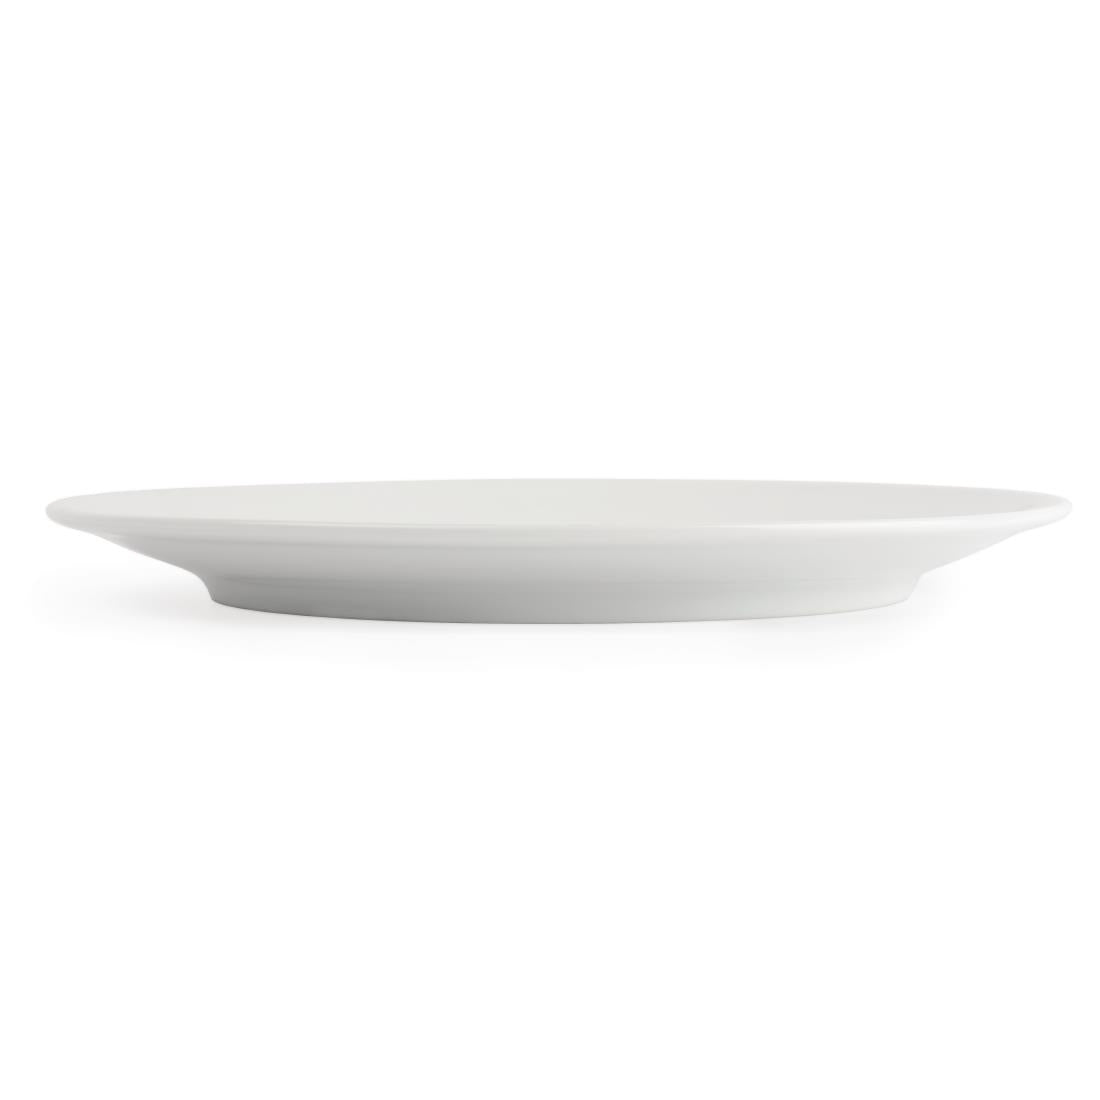 Royal Porcelain Classic White Coupe Plates 240mm (Pack of 12)